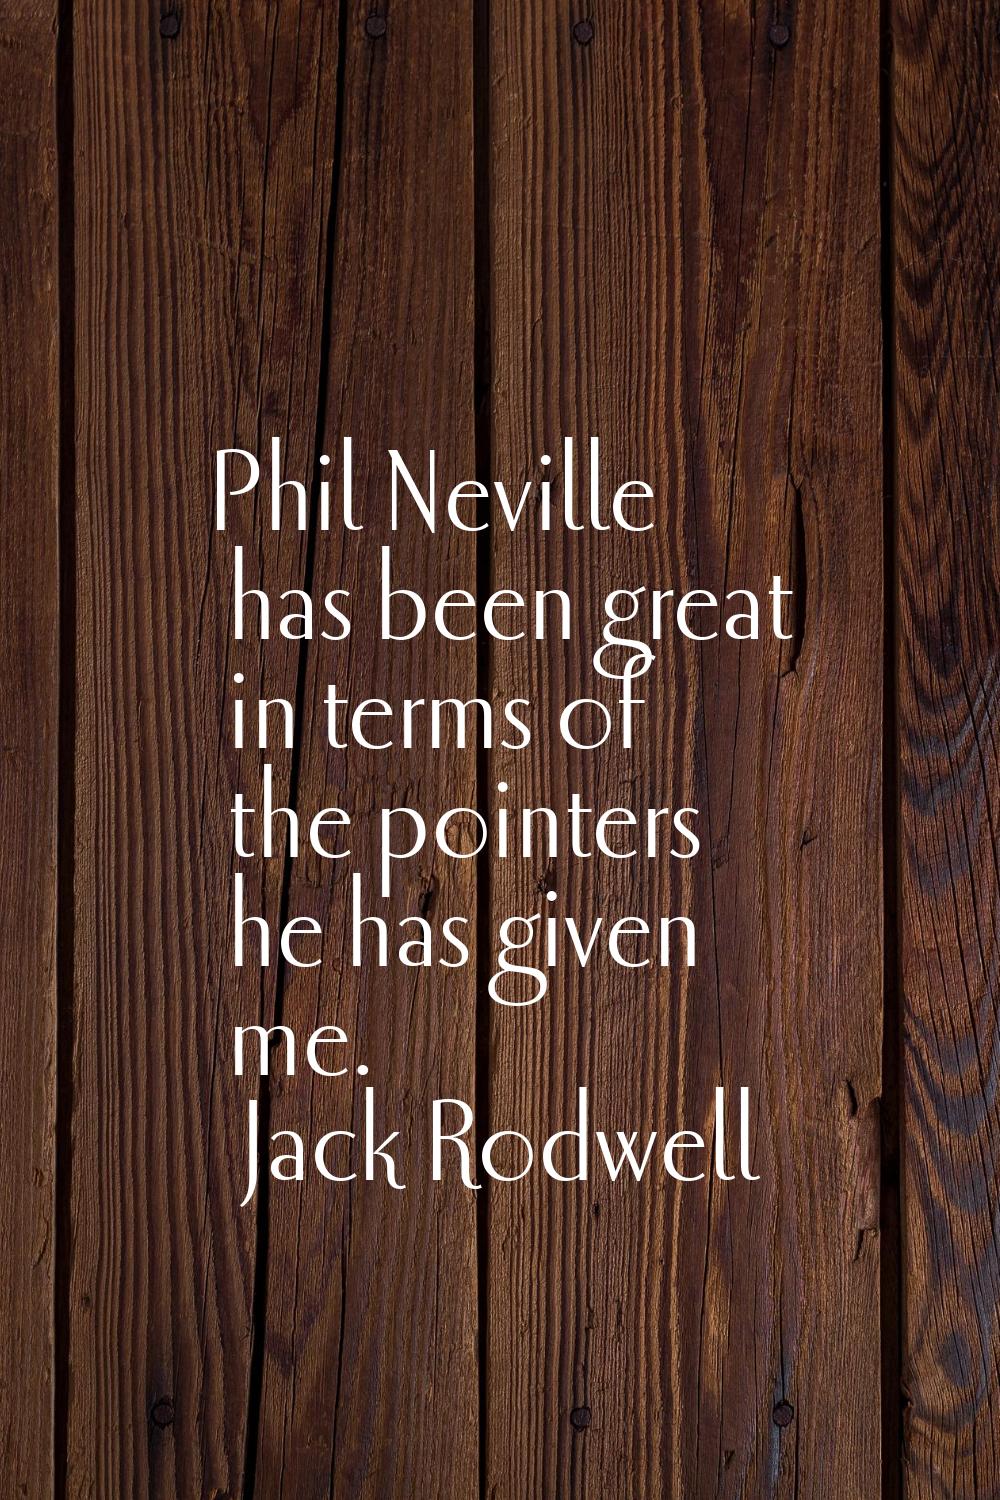 Phil Neville has been great in terms of the pointers he has given me.